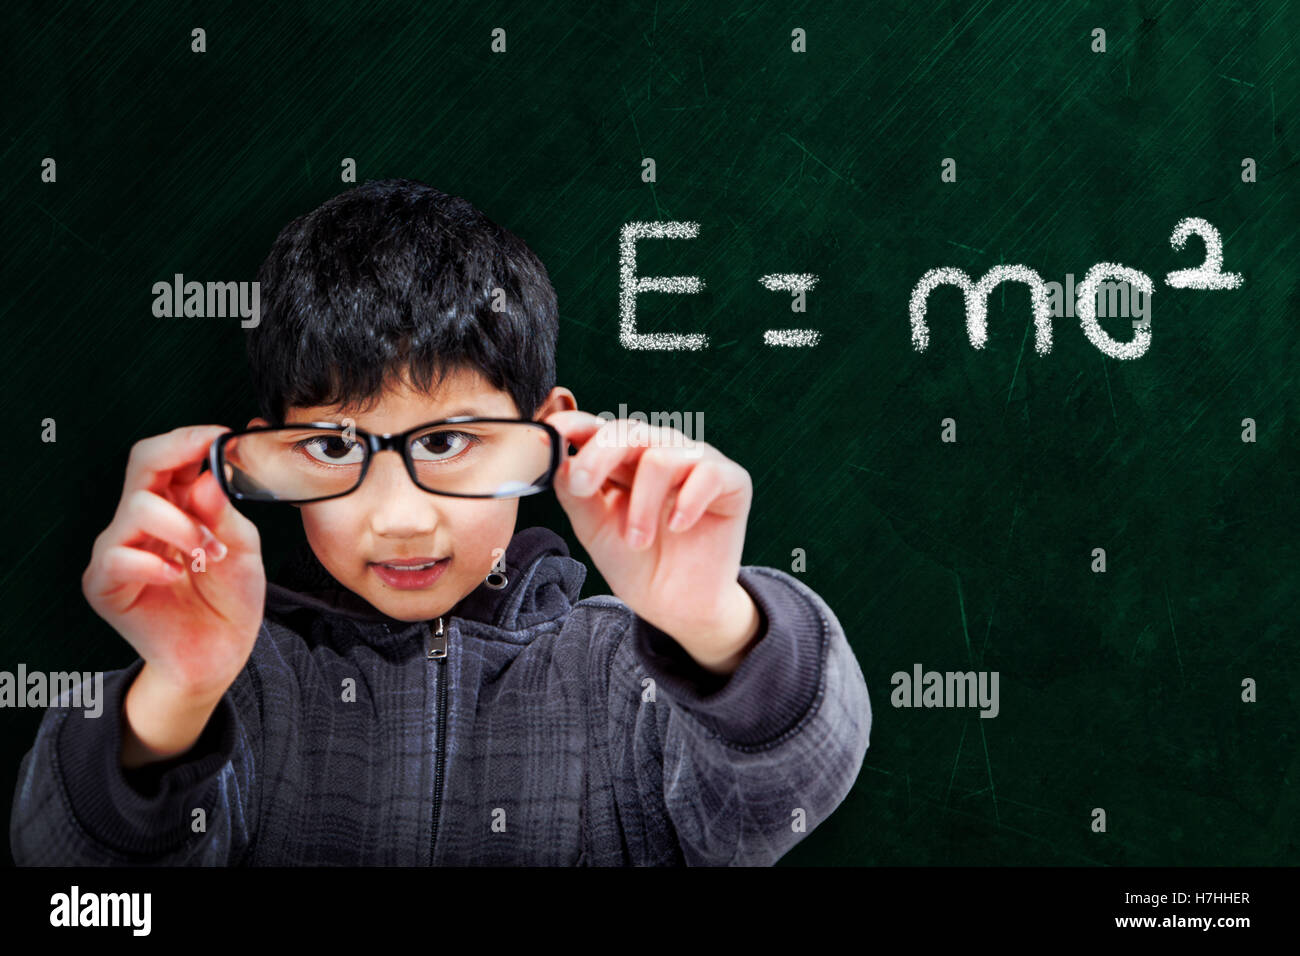 Smart Asian boy holding up eyeglasses on chalkboard background with mathematical equation and copy space. Stock Photo